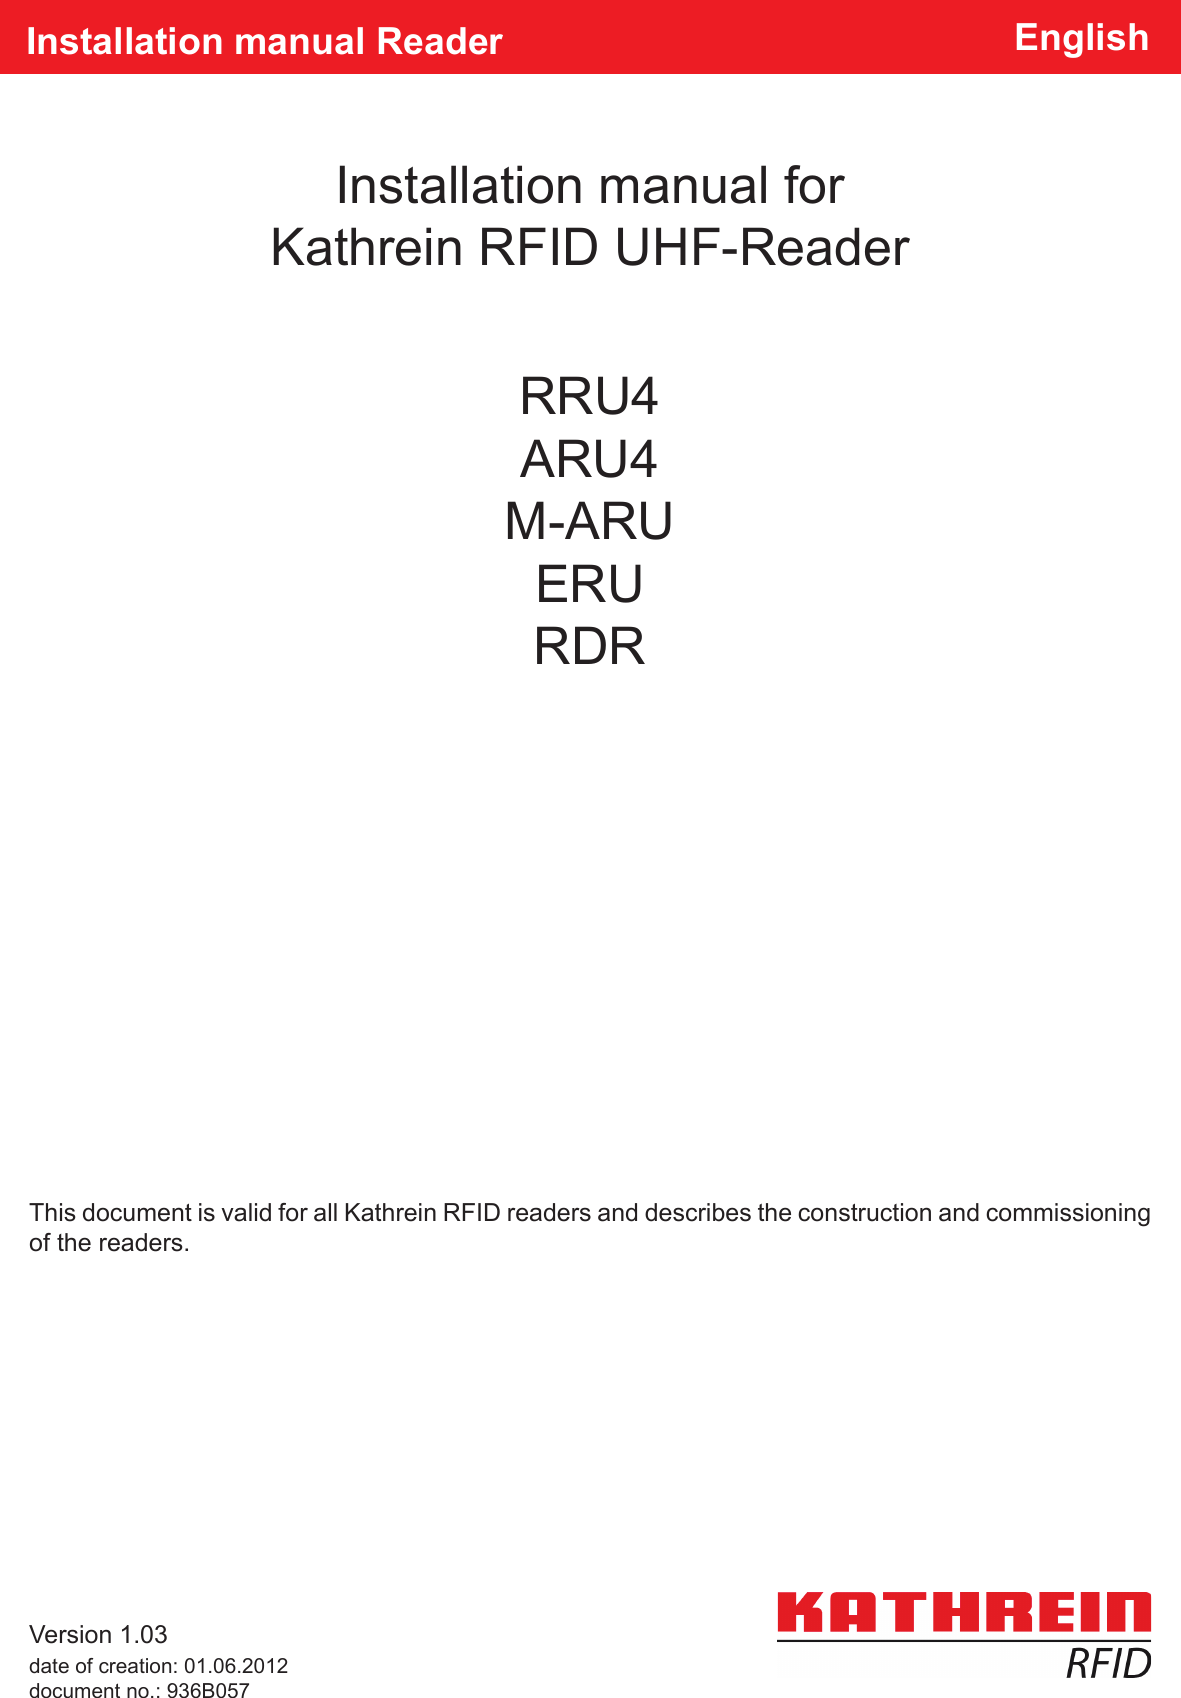 Installation manual for Kathrein RFID UHF-ReaderInstallation manual Reader EnglishThis document is valid for all Kathrein RFID readers and describes the construction and commissioning of the readers.Version 1.03date of creation: 01.06.2012document no.: 936B057RRU4ARU4M-ARUERURDR